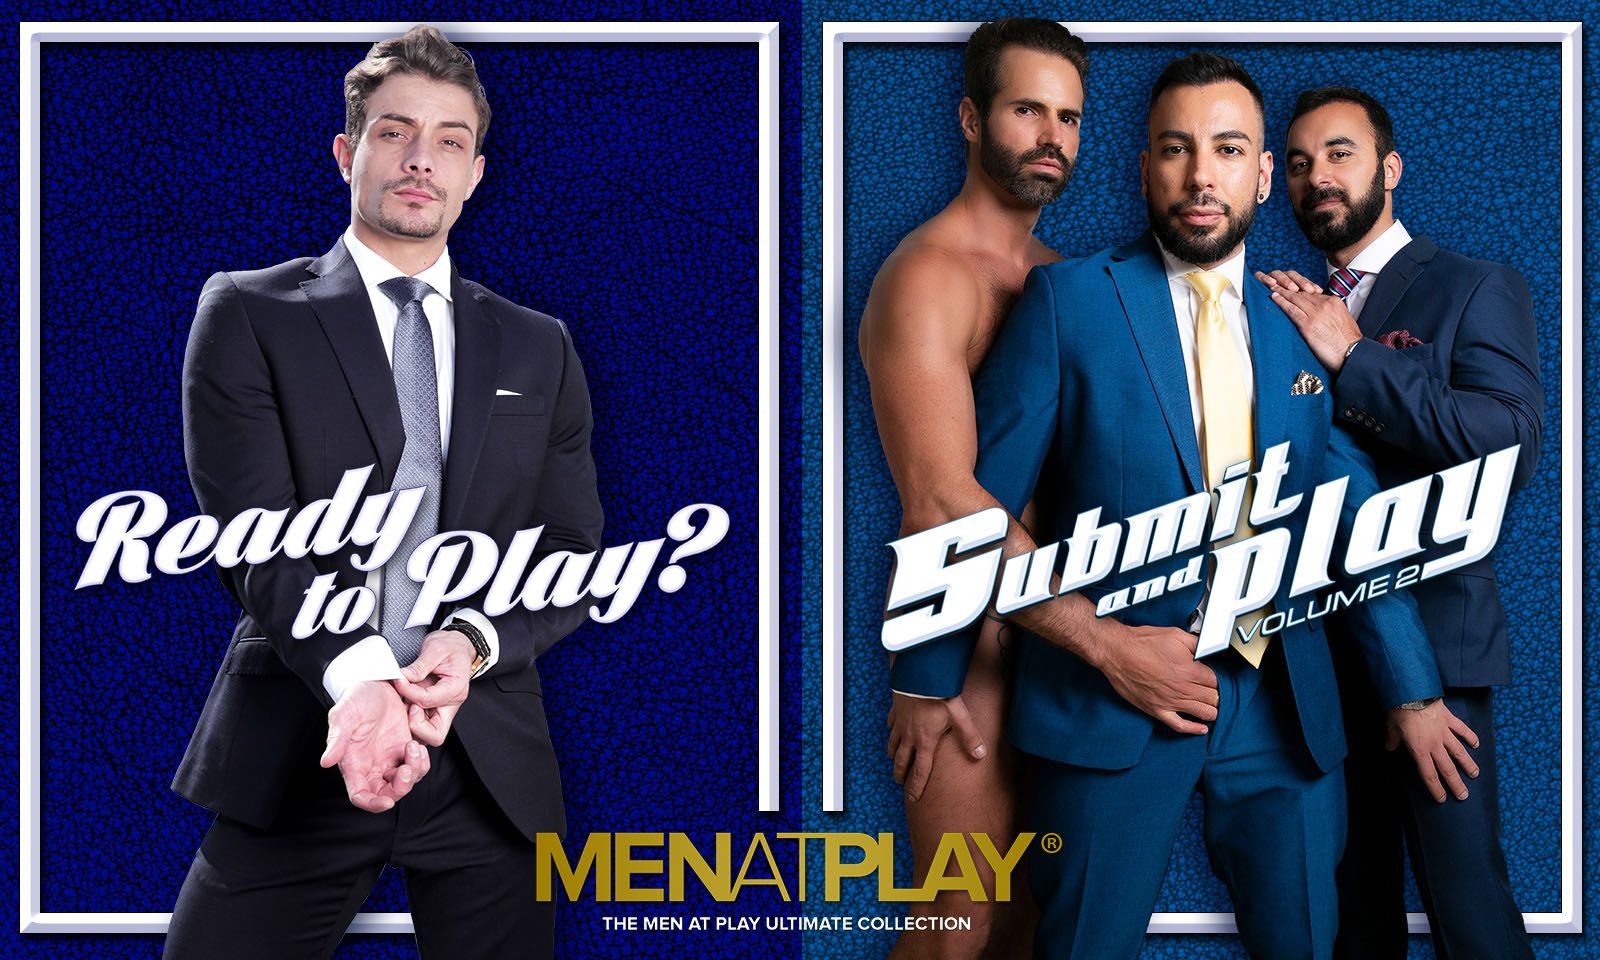 MenAtPlay Releases New DVDs 'Ready to Play' & 'Submit and Play 2'